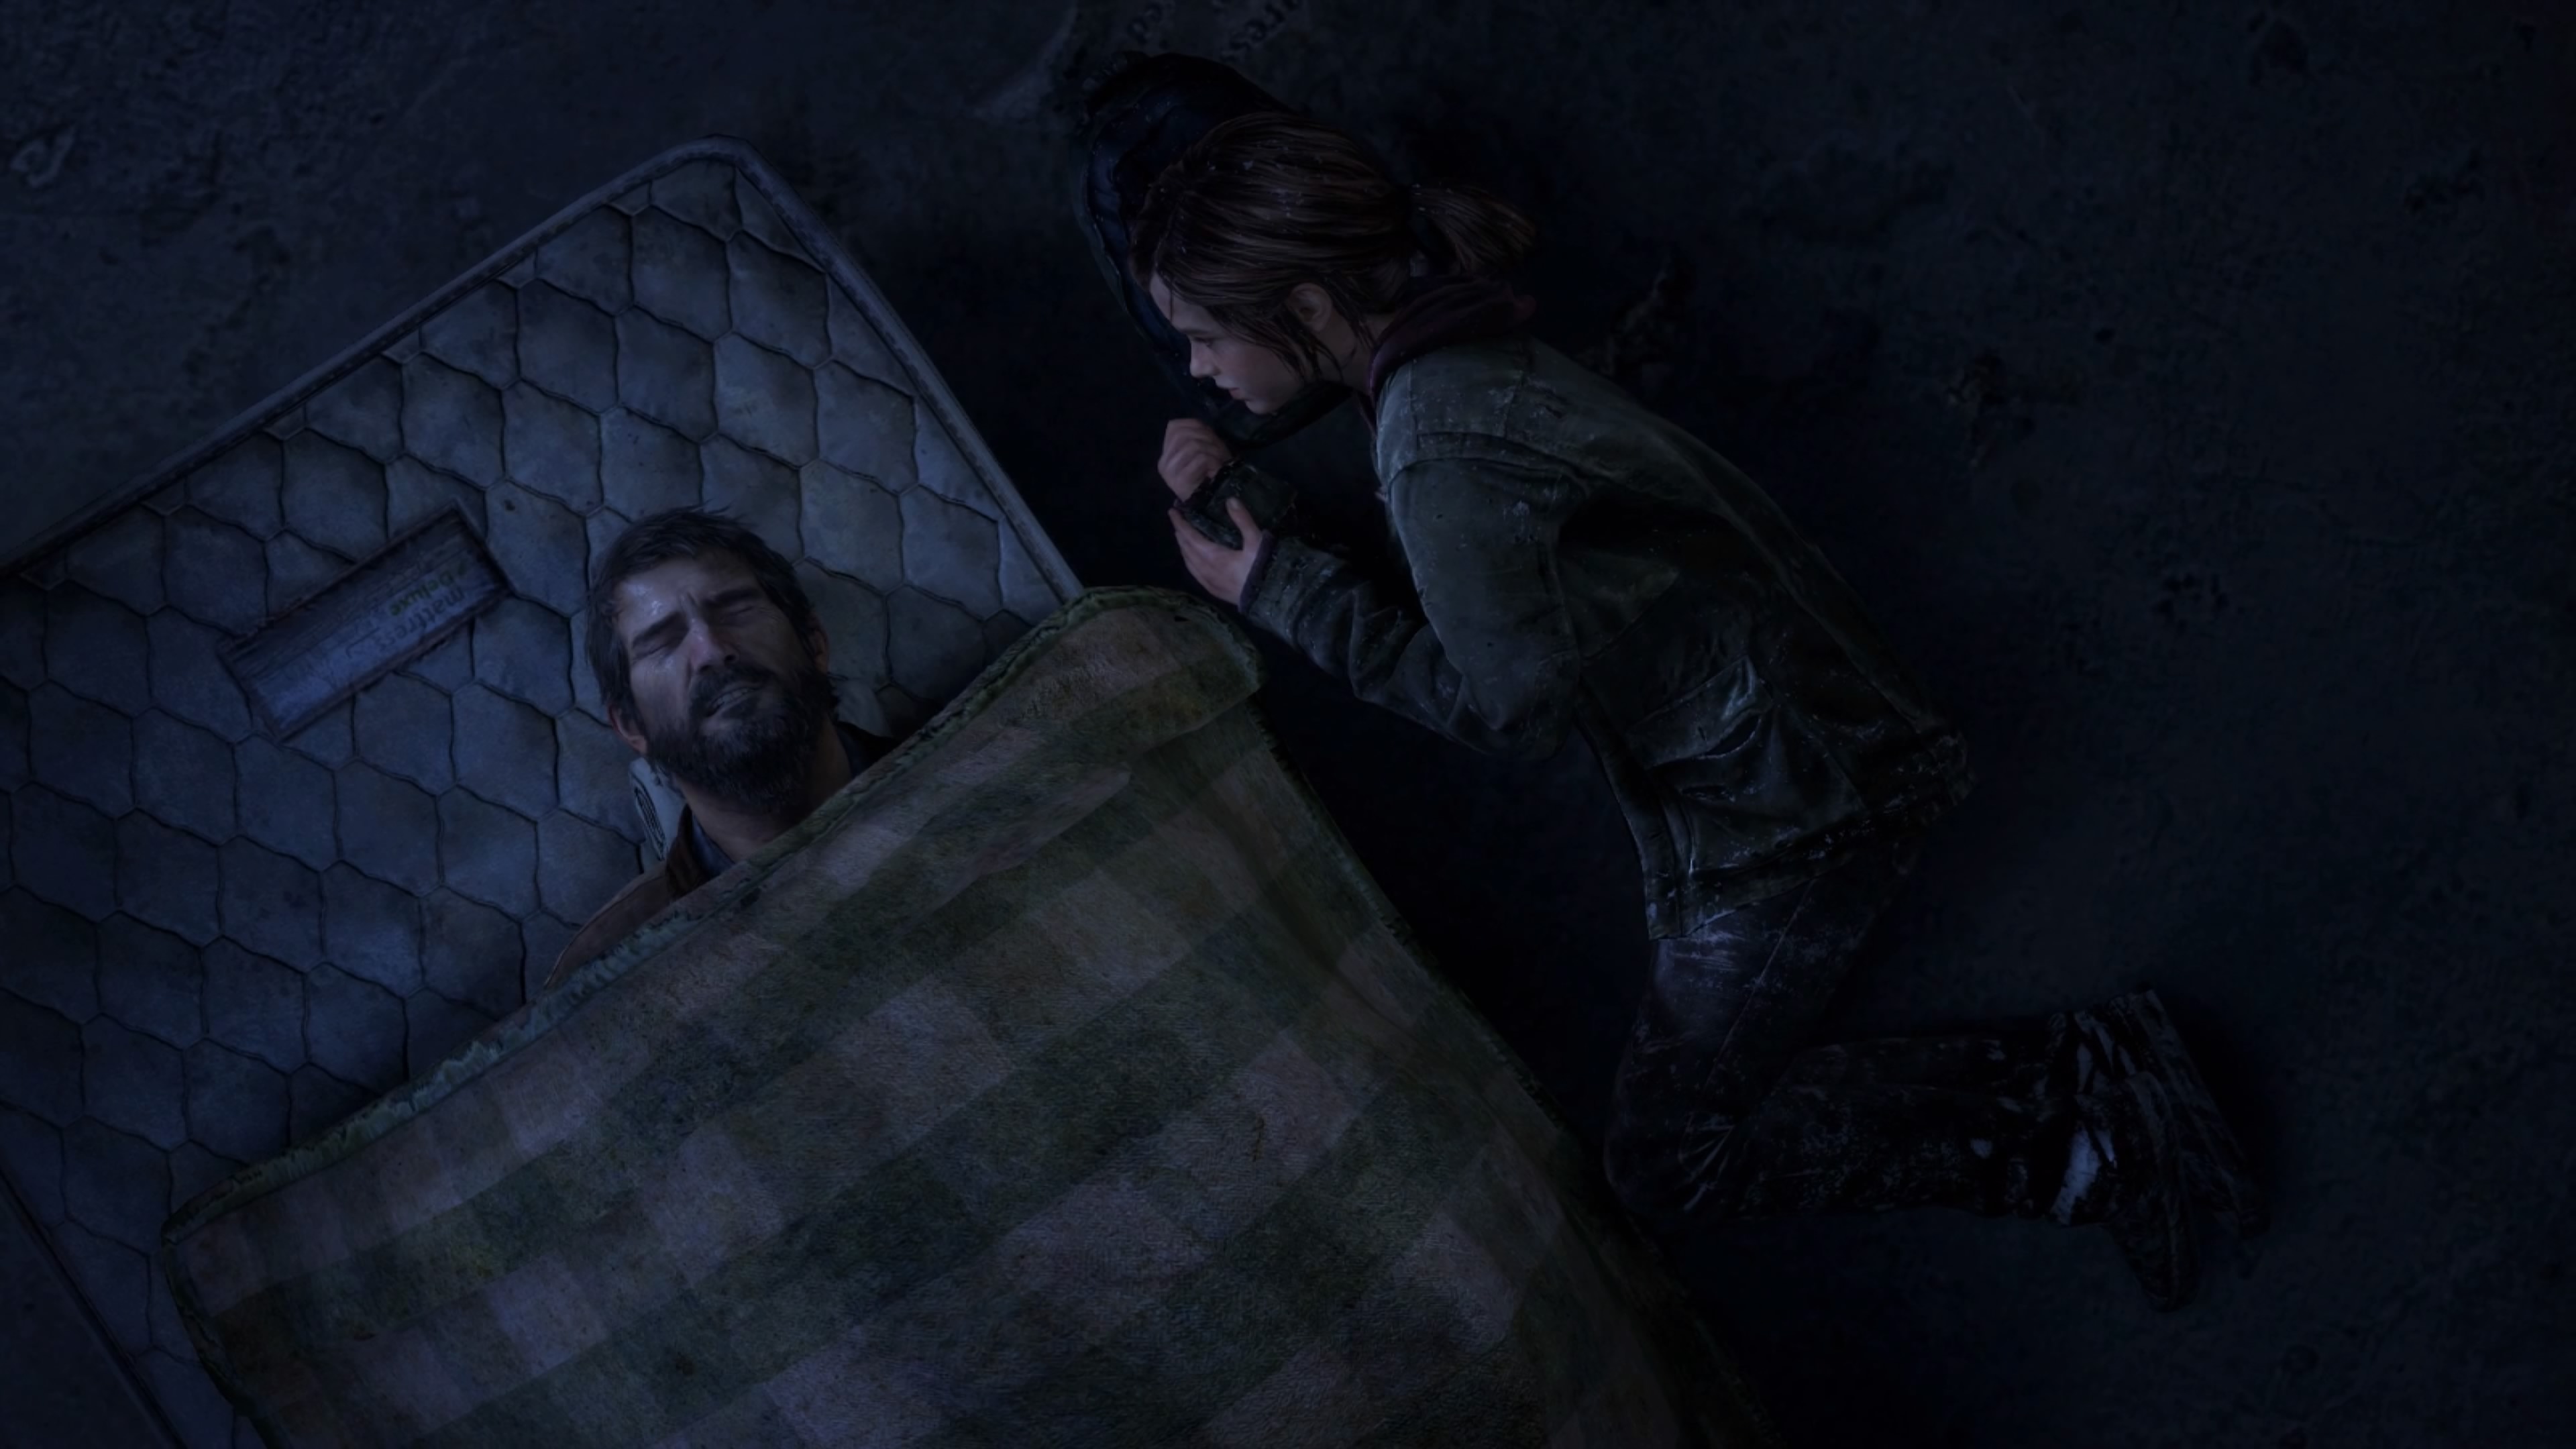 General 3840x2160 The Last of Us Ellie Williams Joel Miller video games screen shot PlayStation 4 video game characters Playstation 4 Pro Naughty Dog PlayStation 3